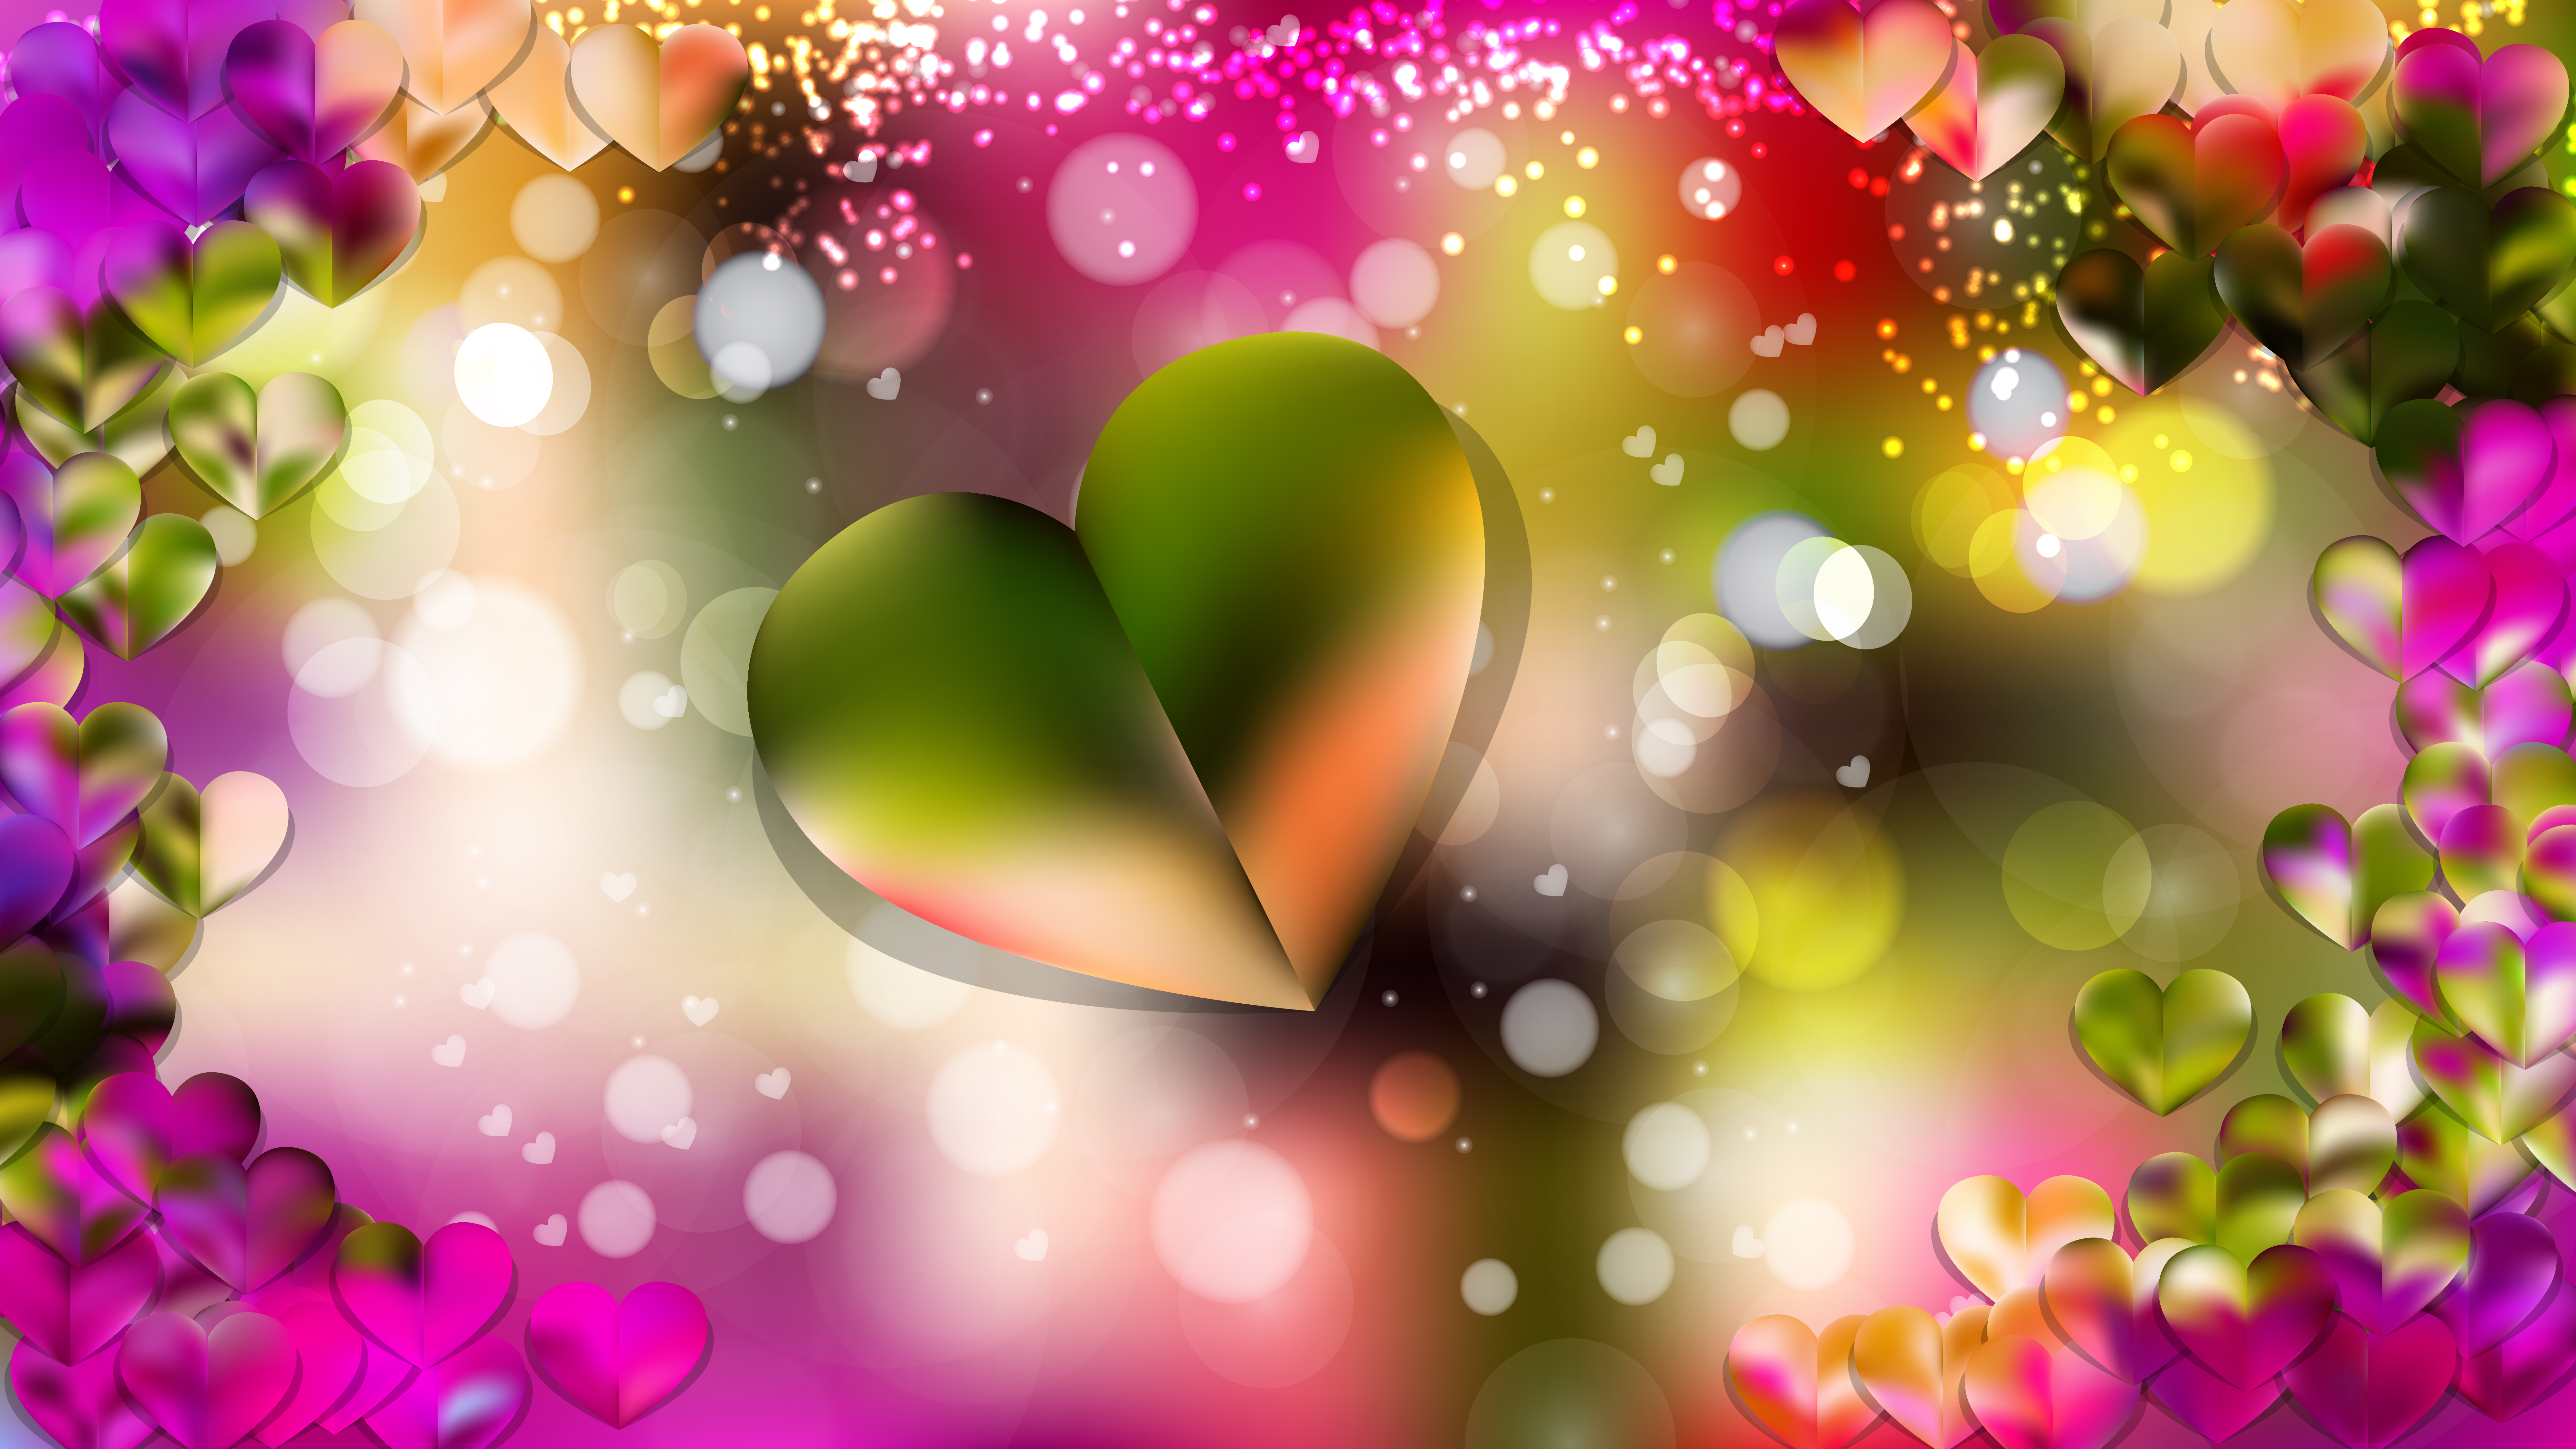 cool green love backgrounds